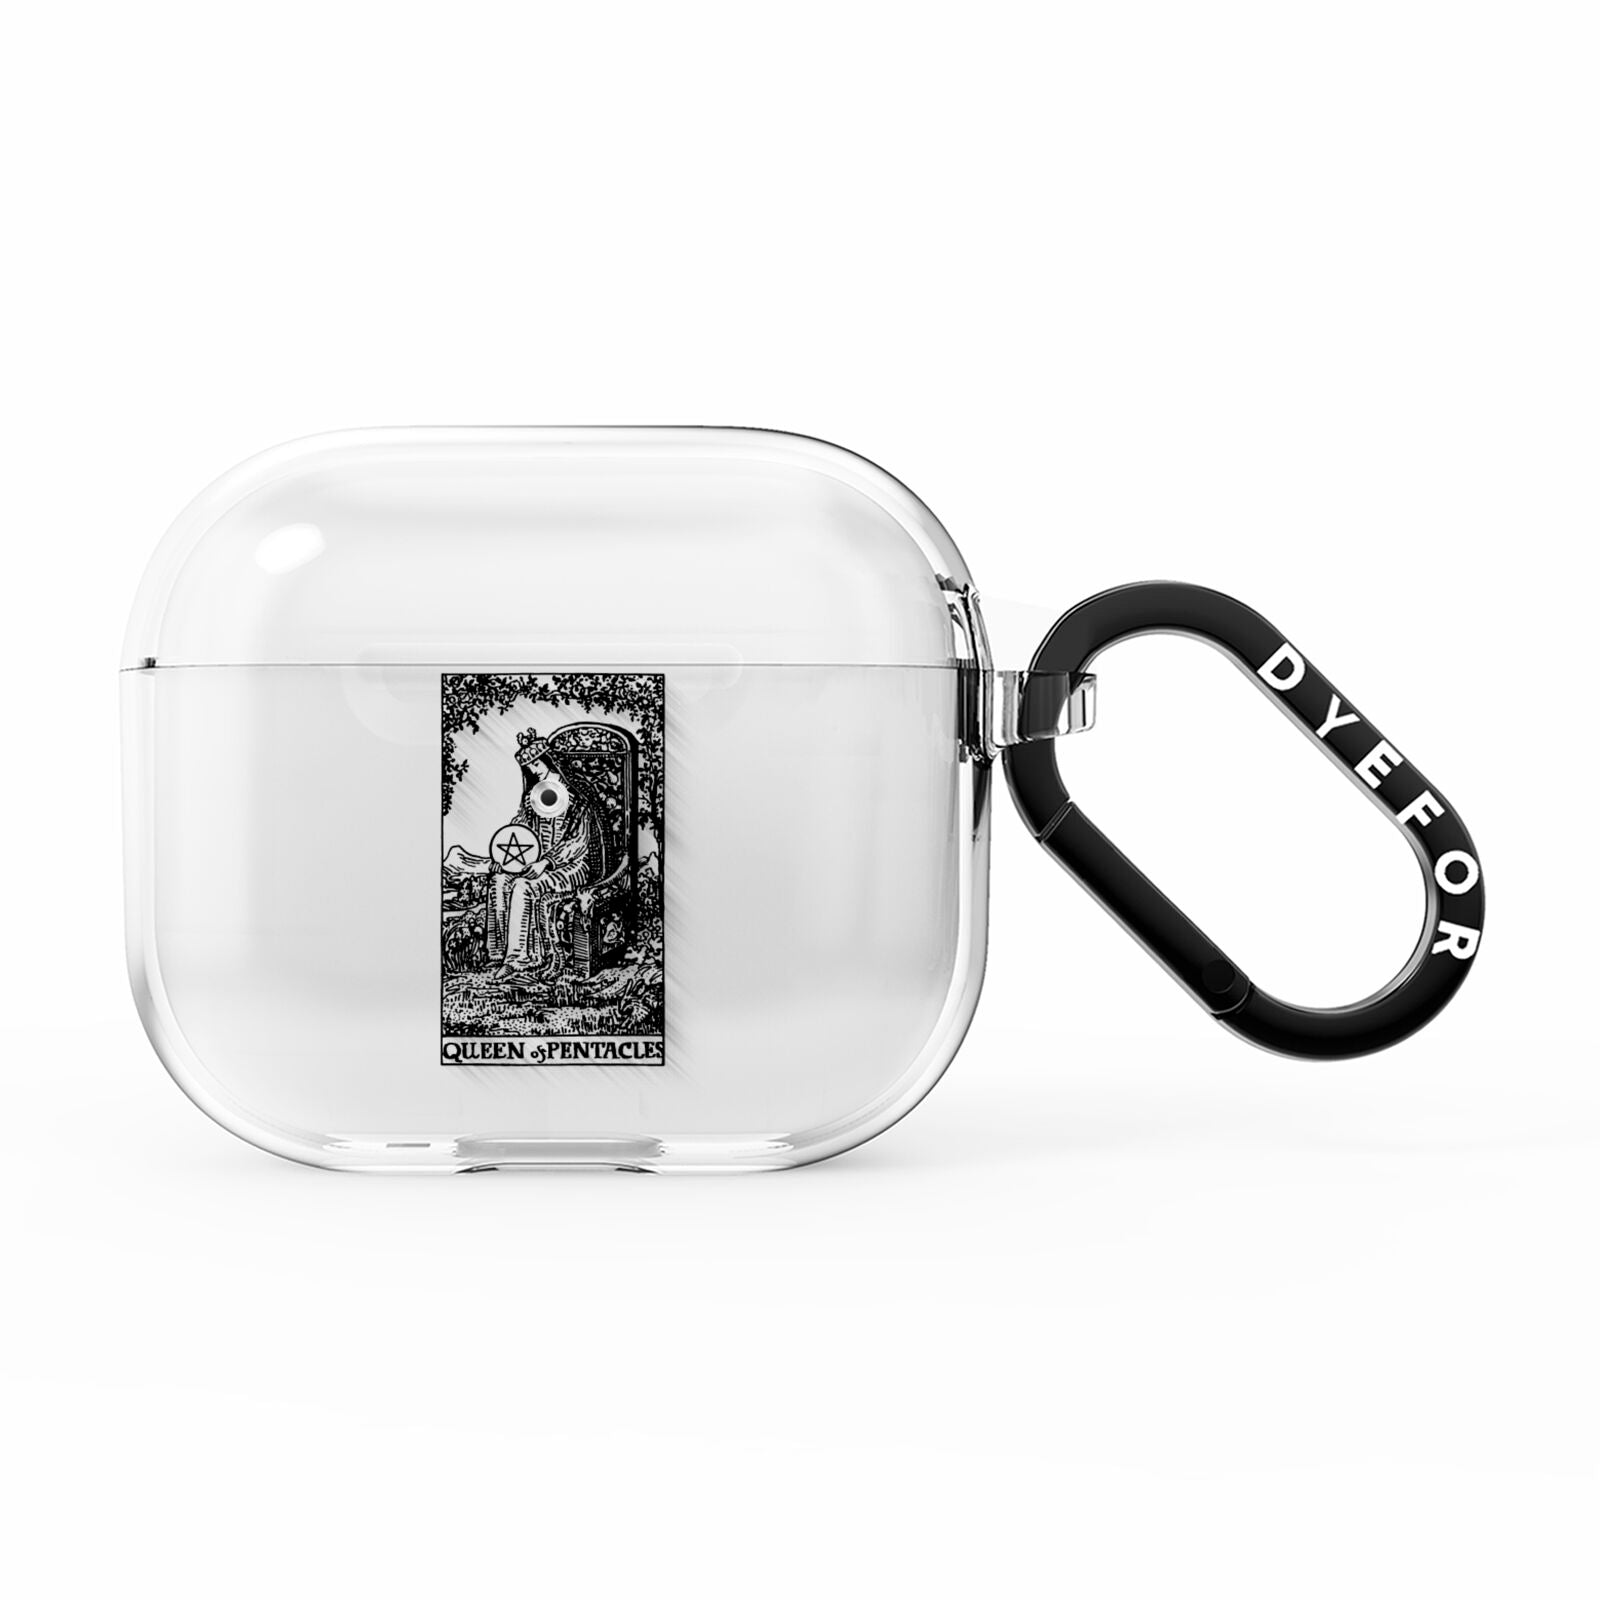 Queen of Pentacles Monochrome AirPods Clear Case 3rd Gen